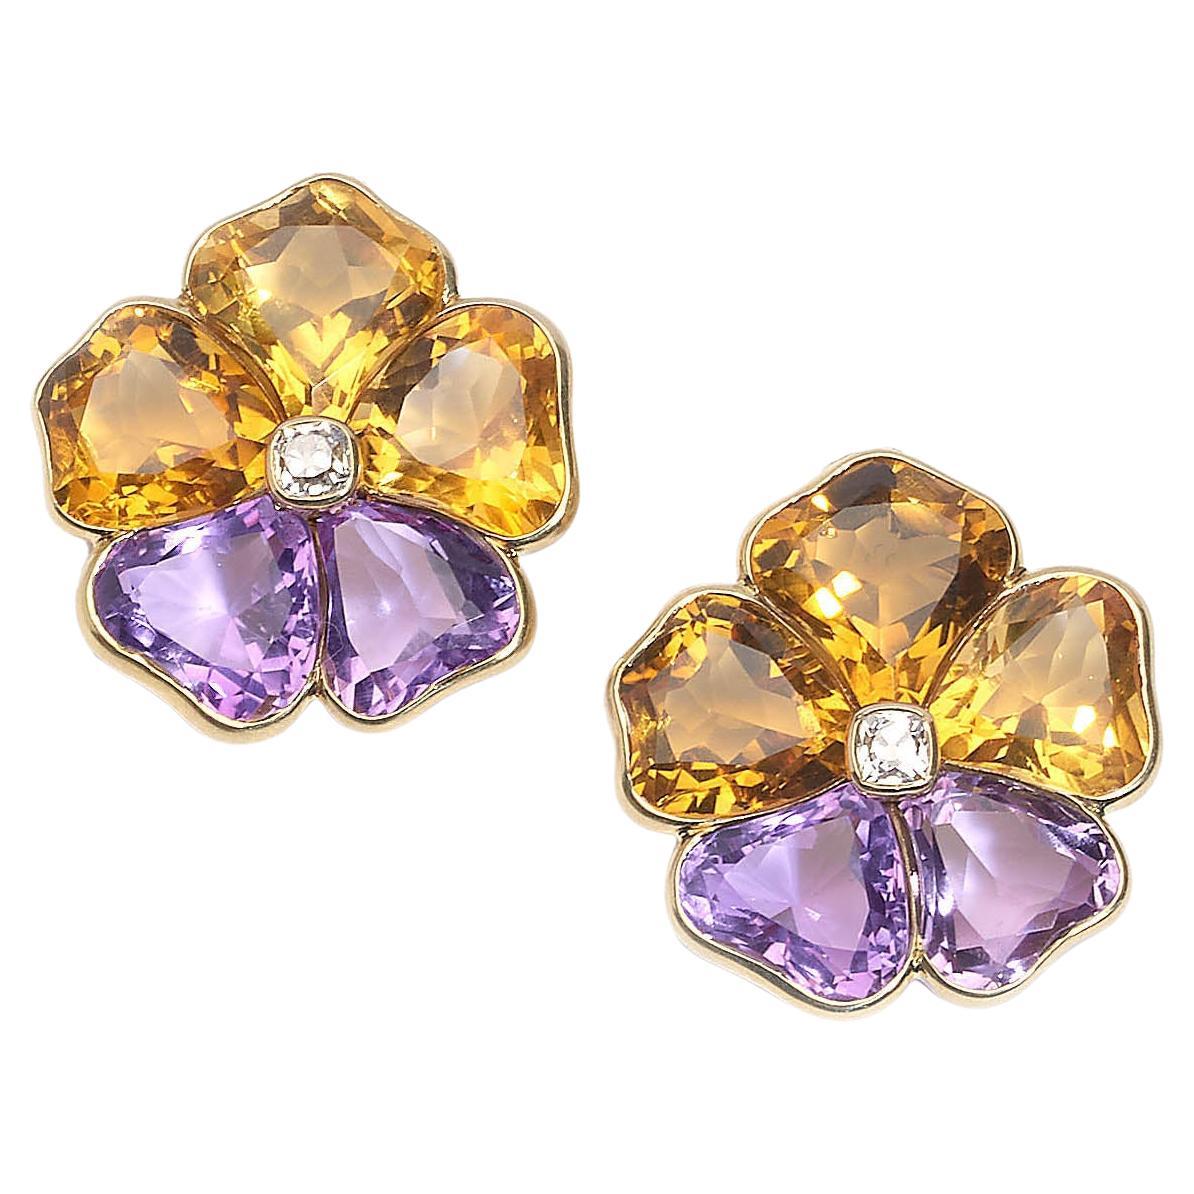 Harvey & Gore Amethyst, Citrine, Diamond and Gold Pansy Earrings, 1973